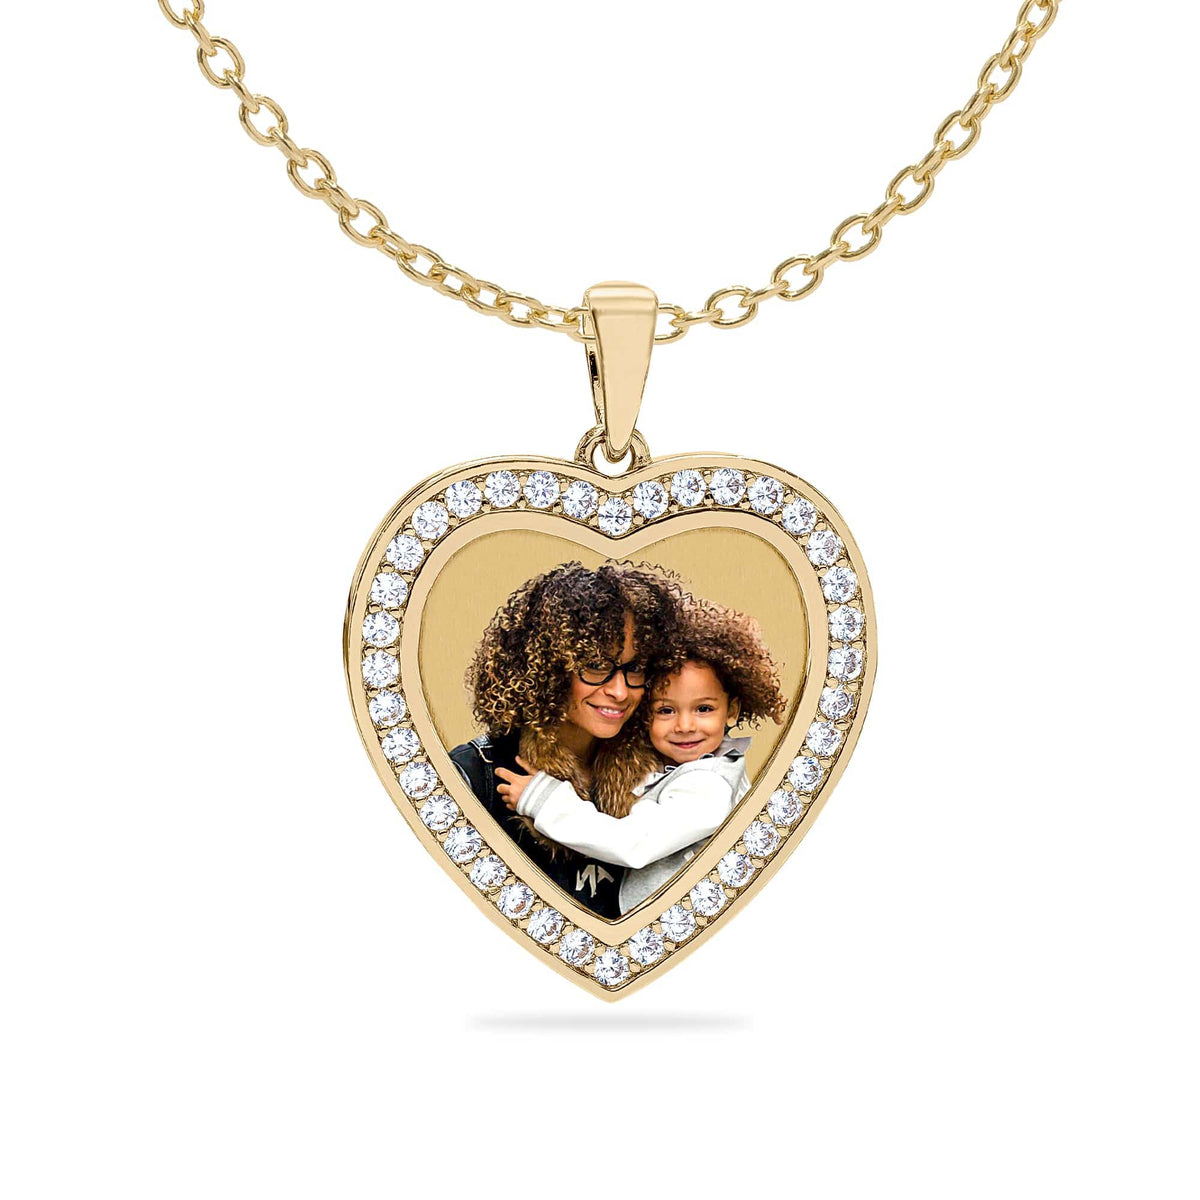 Gold Plated / Link Chain Heart Shaped Photo Pendant with Stones